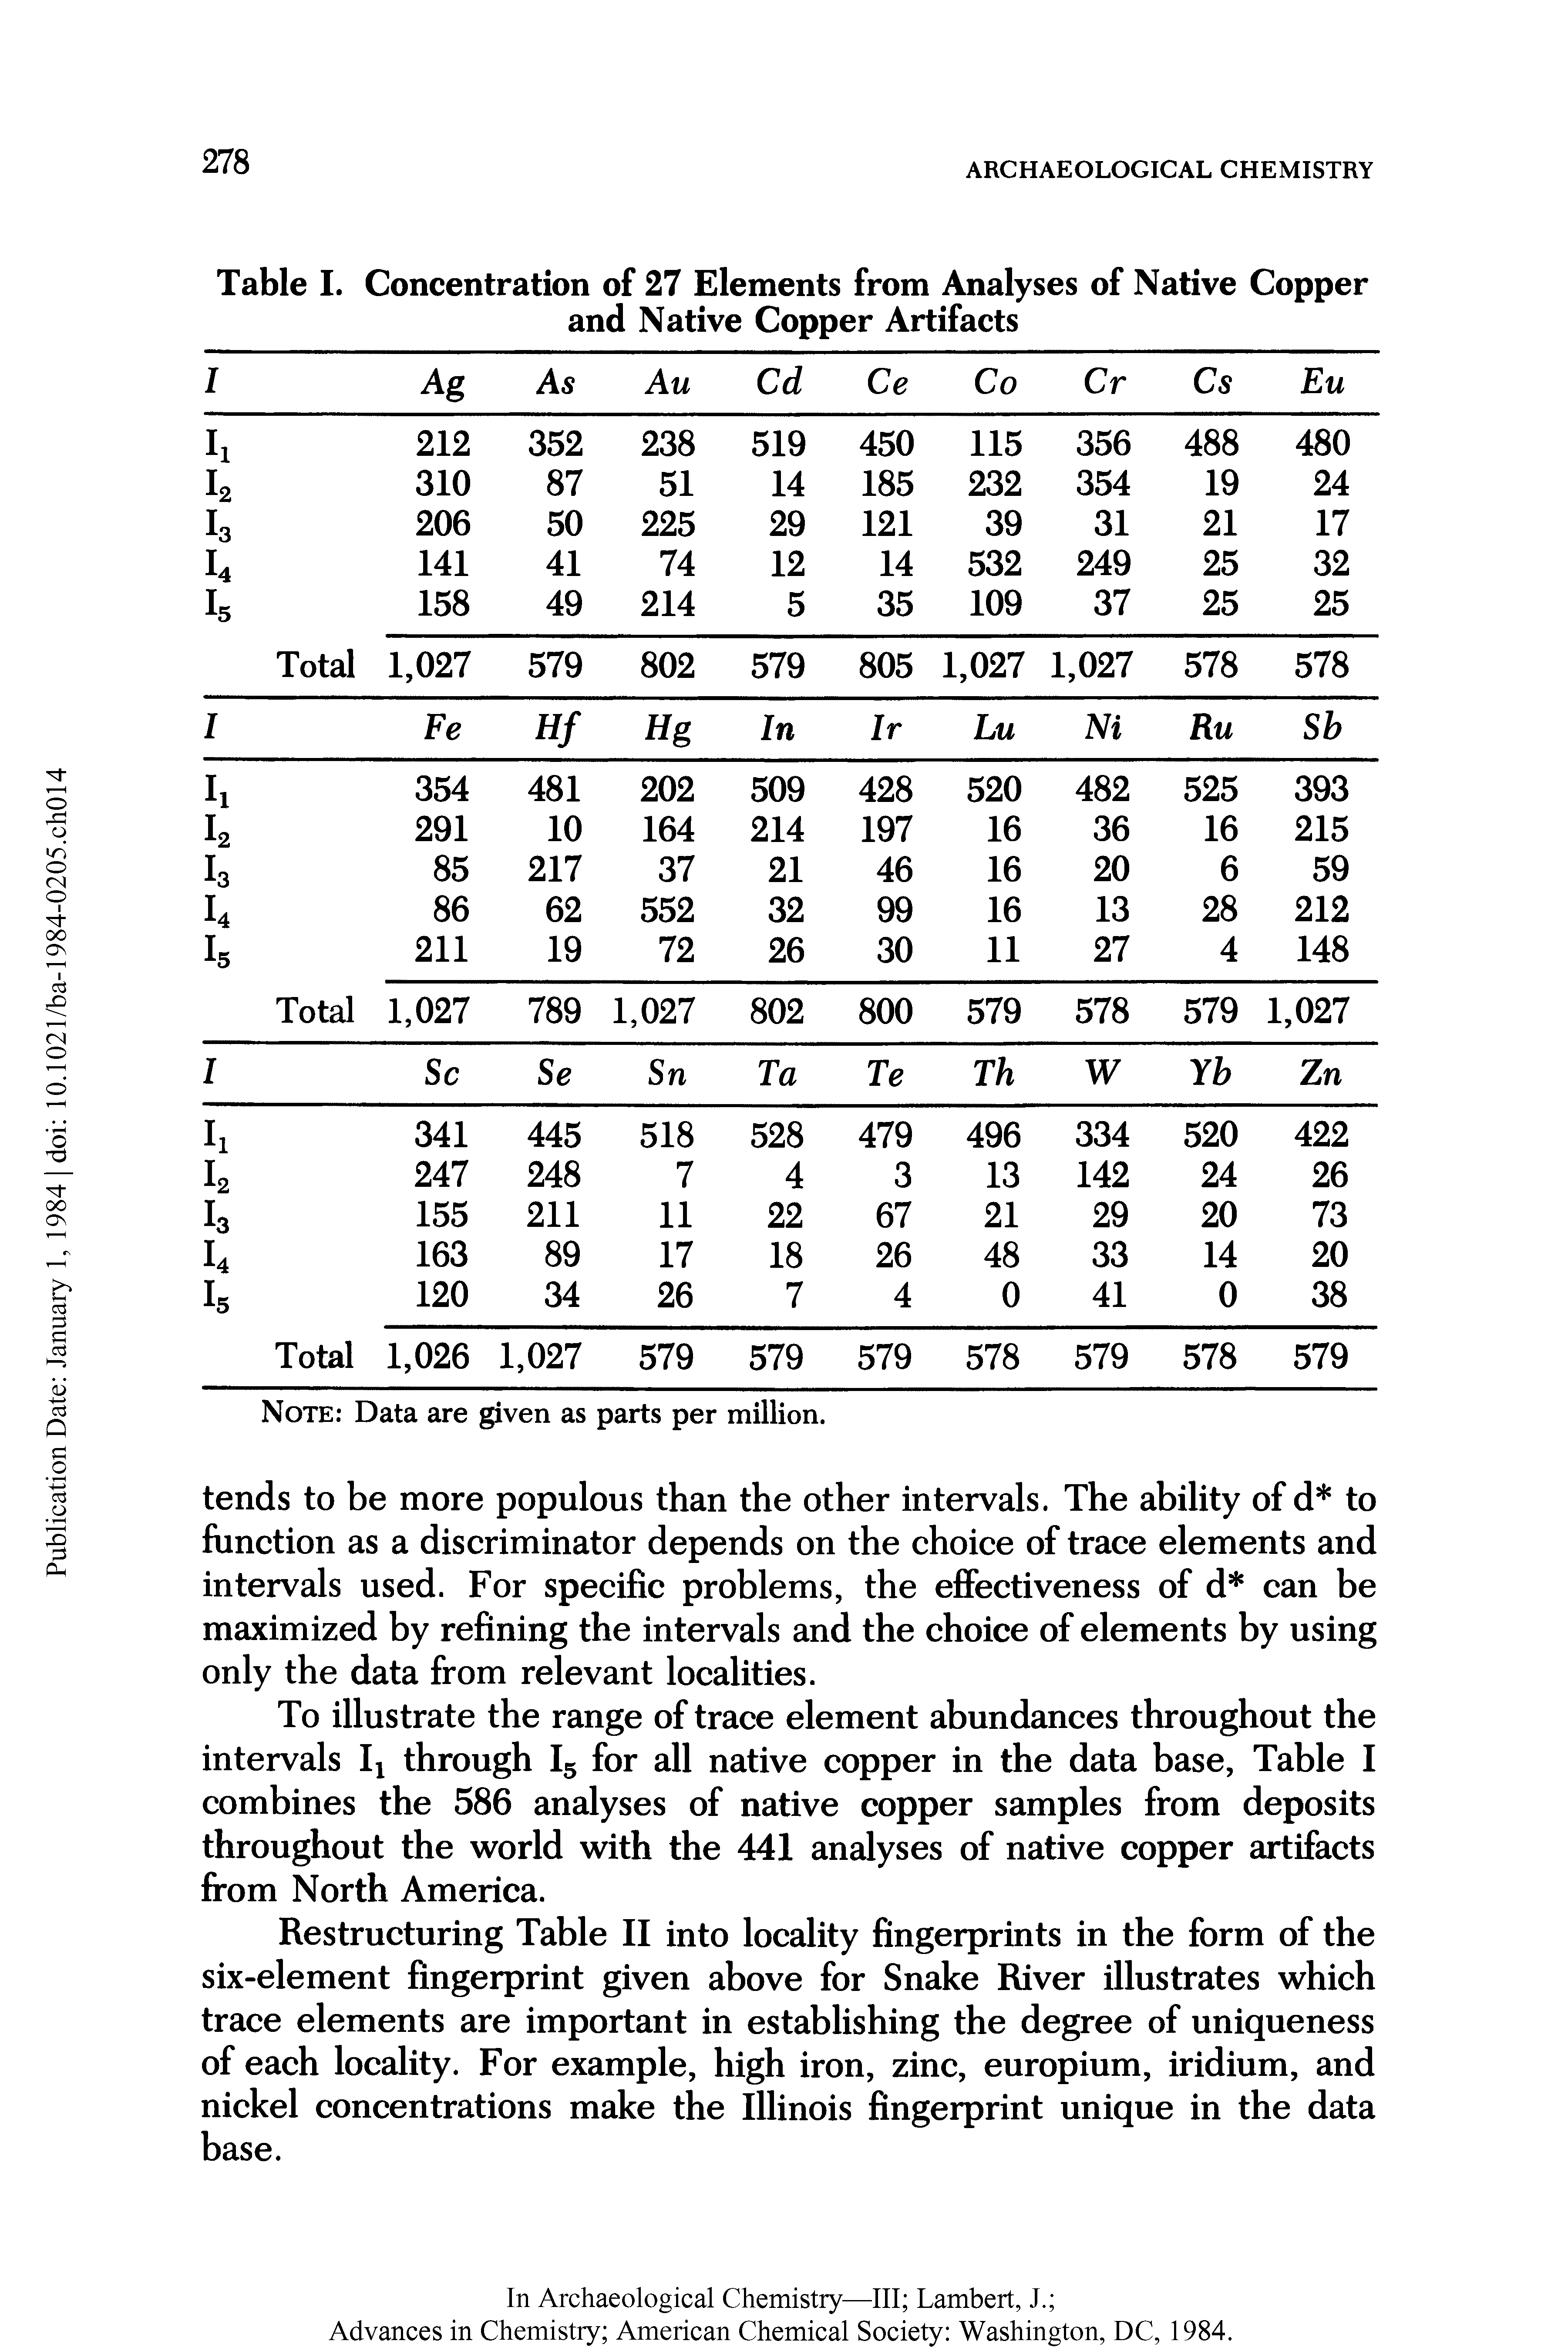 Table I. Concentration of 27 Elements from Analyses of Native Copper and Native Copper Artifacts...